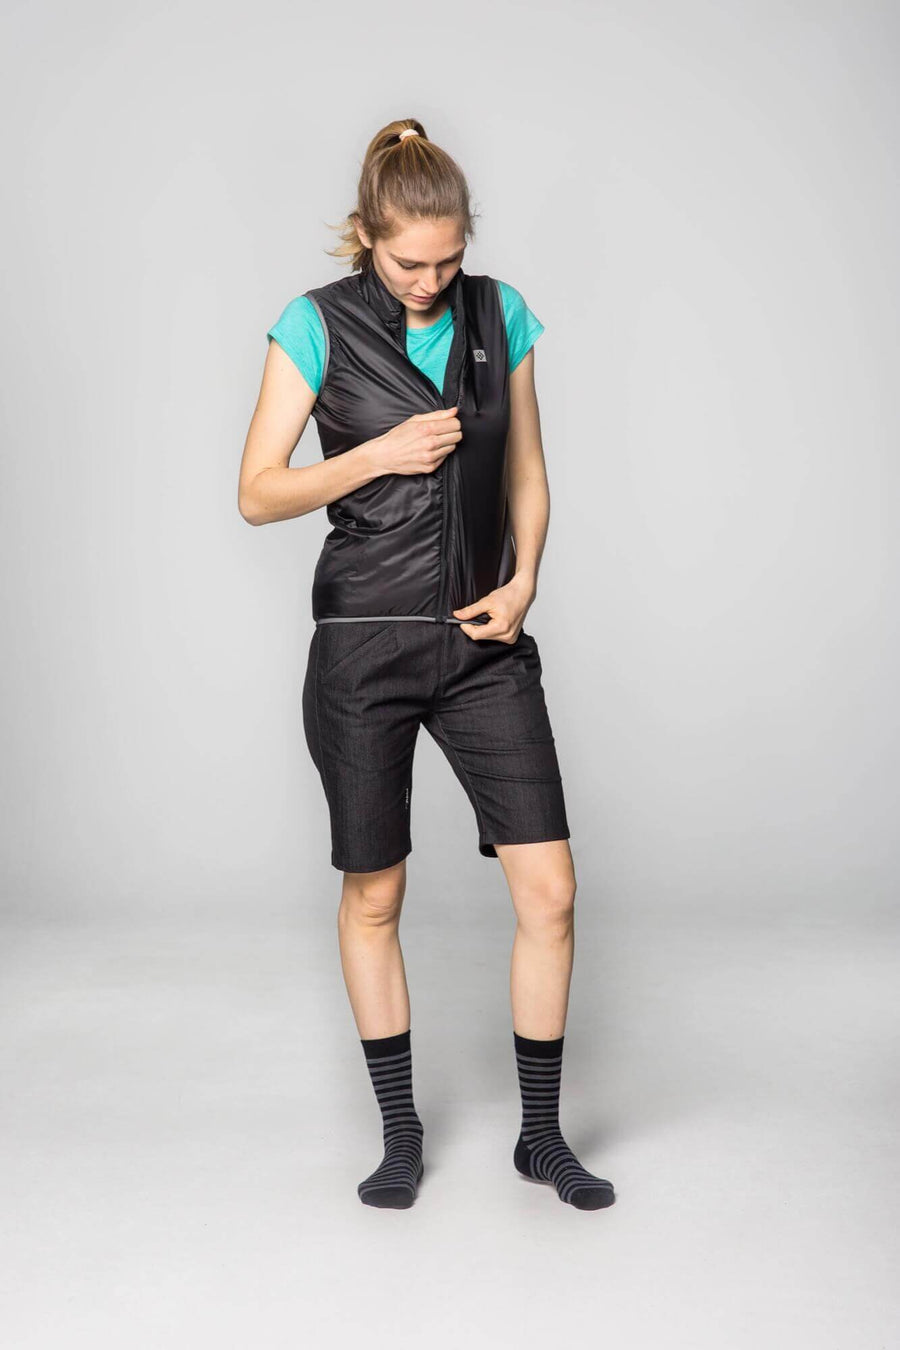 Women‘s - DUUNSOOL Een Westen % OUTLET ARCHIV 1st Edt. 2nd Edt. Anthracite Herbst / Winter Jacken & Westen L Lavalan Wool Insulation M Merino Mountainbike PFC Free PRO - Tight - Race Cut Recycled Polyester Road & Gravel S spo-default spo-disabled spo-notify-me-disabled tops Urban & E-Bike Winter-Guide315 Women XS